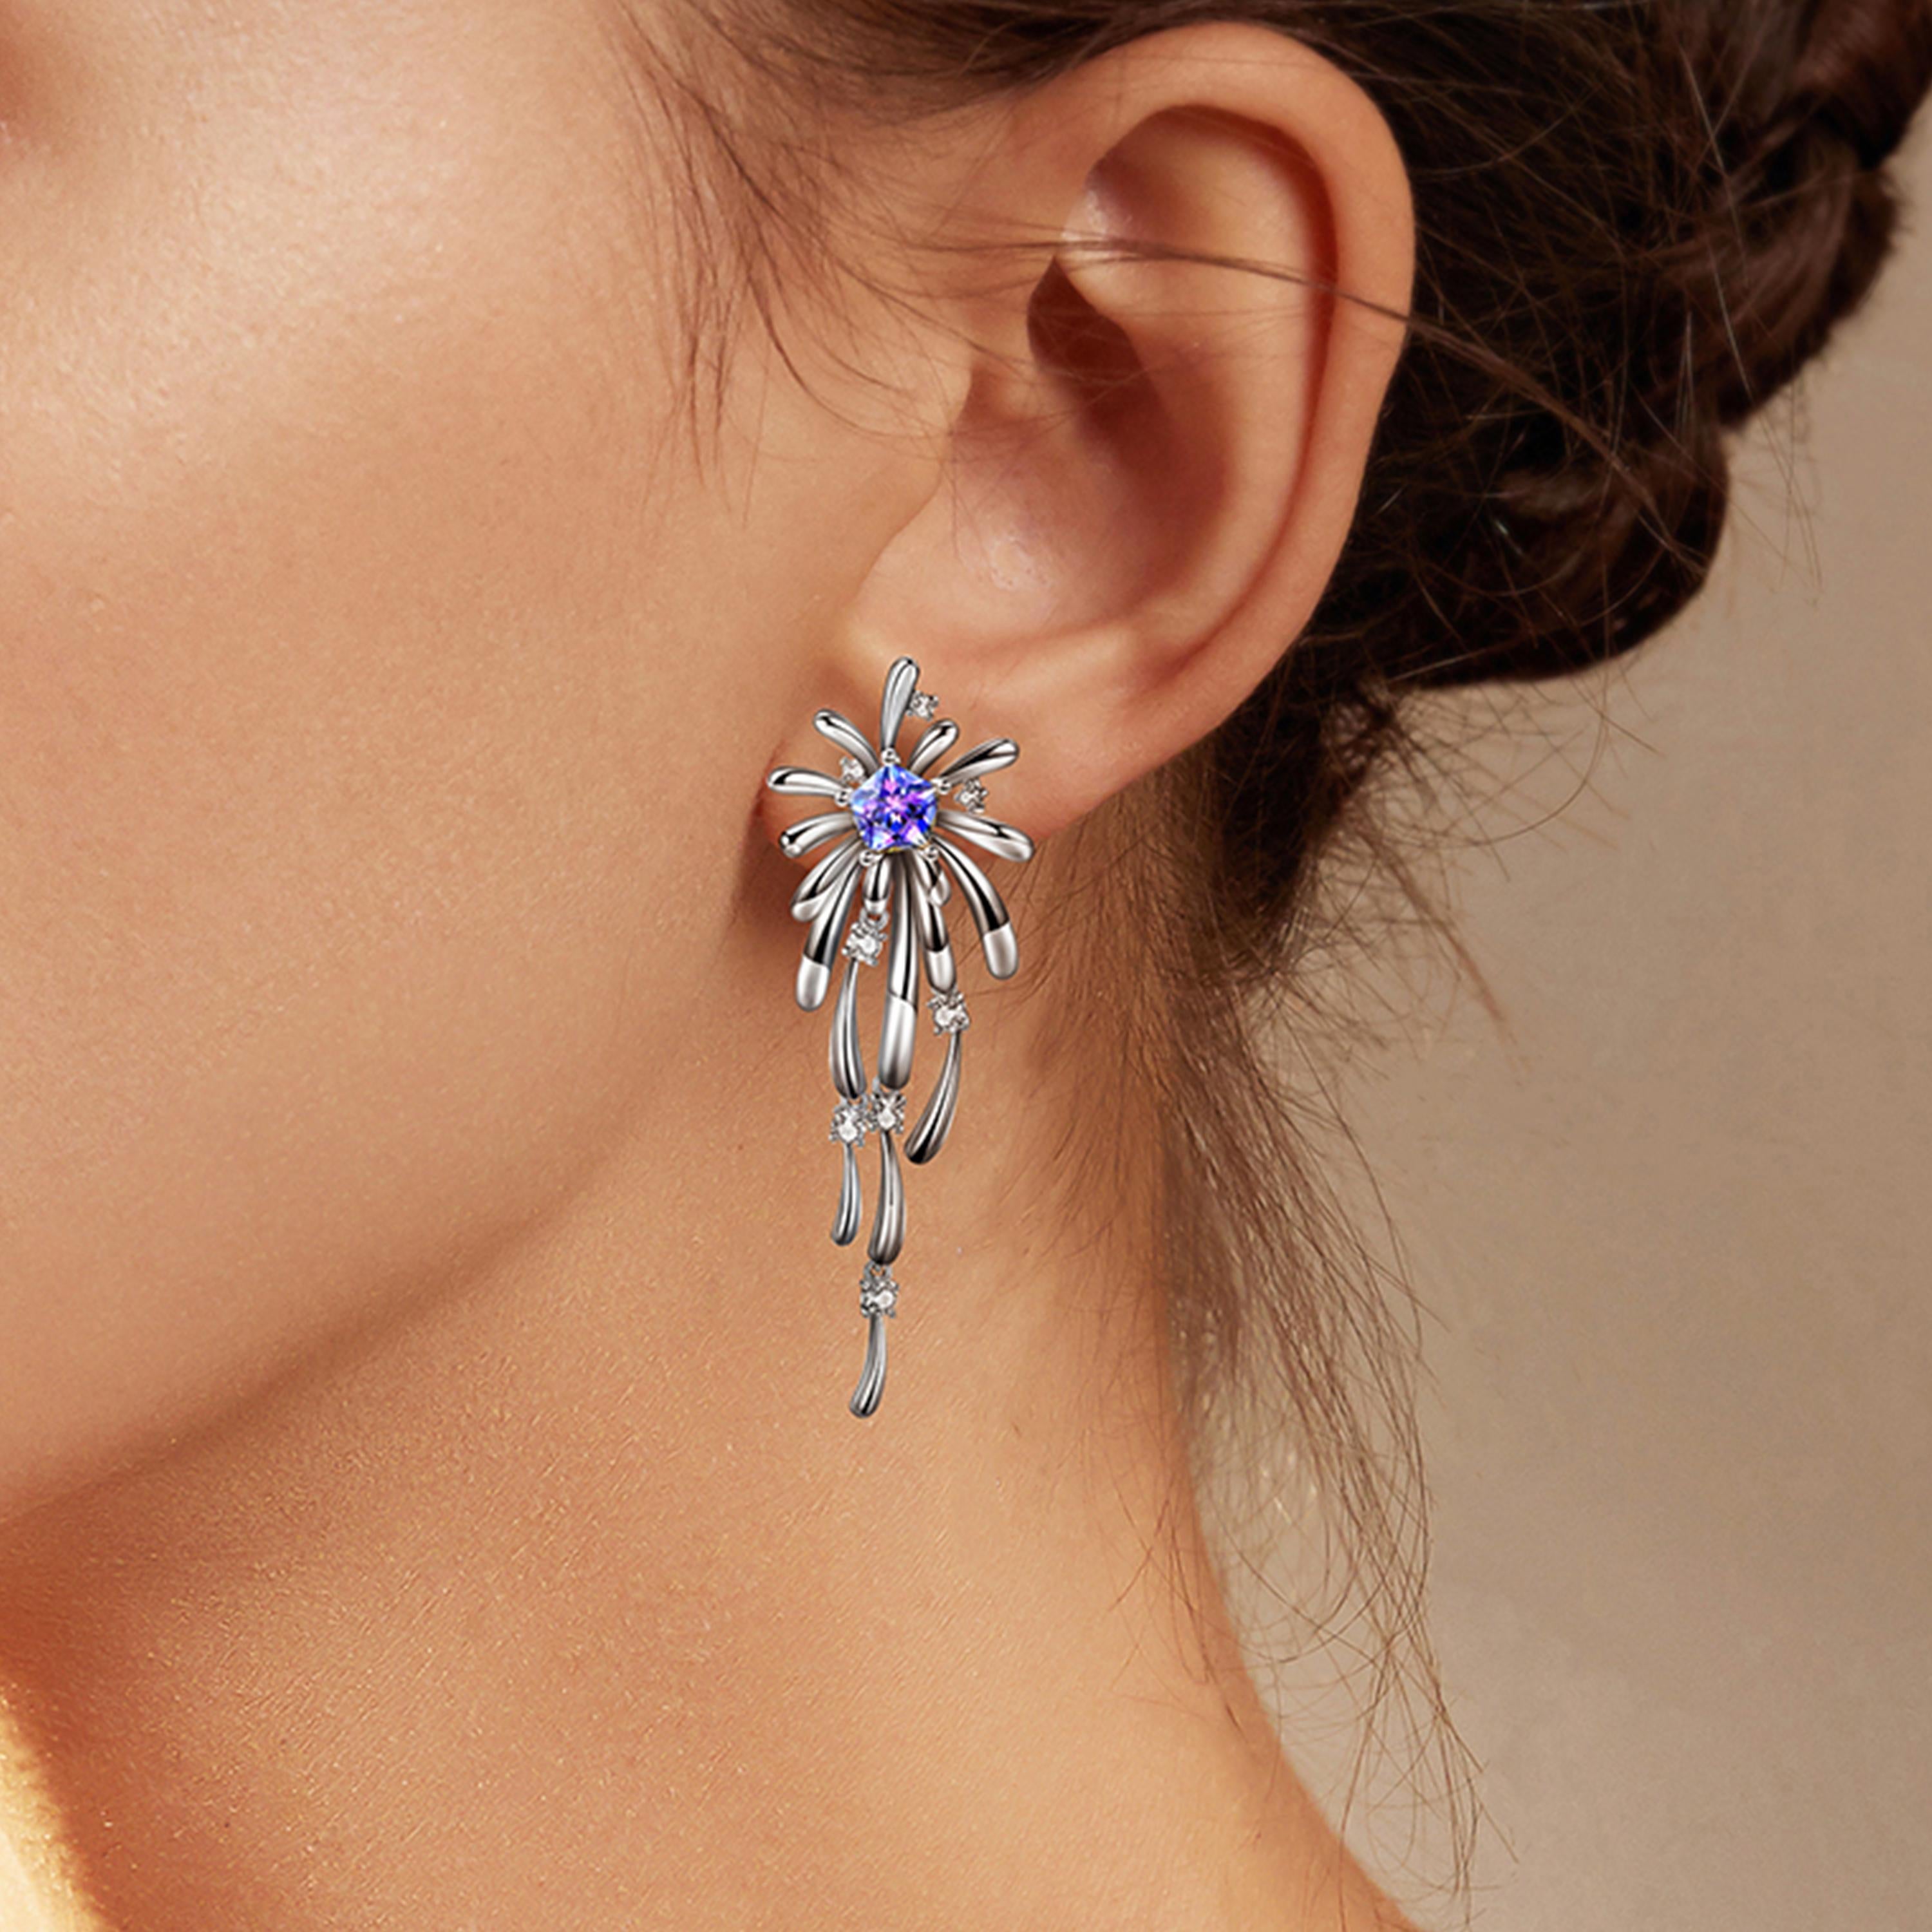 Description:
Light up the room with the new Carpe Diem Collection by Fei Liu! Carpe Diem 'Crossette' drop earrings with Swarovski Purple-Aqua Pentagon Star cubic zirconia and 8 hearts and 8 arrows CZ, set in white rhodium plate on sterling